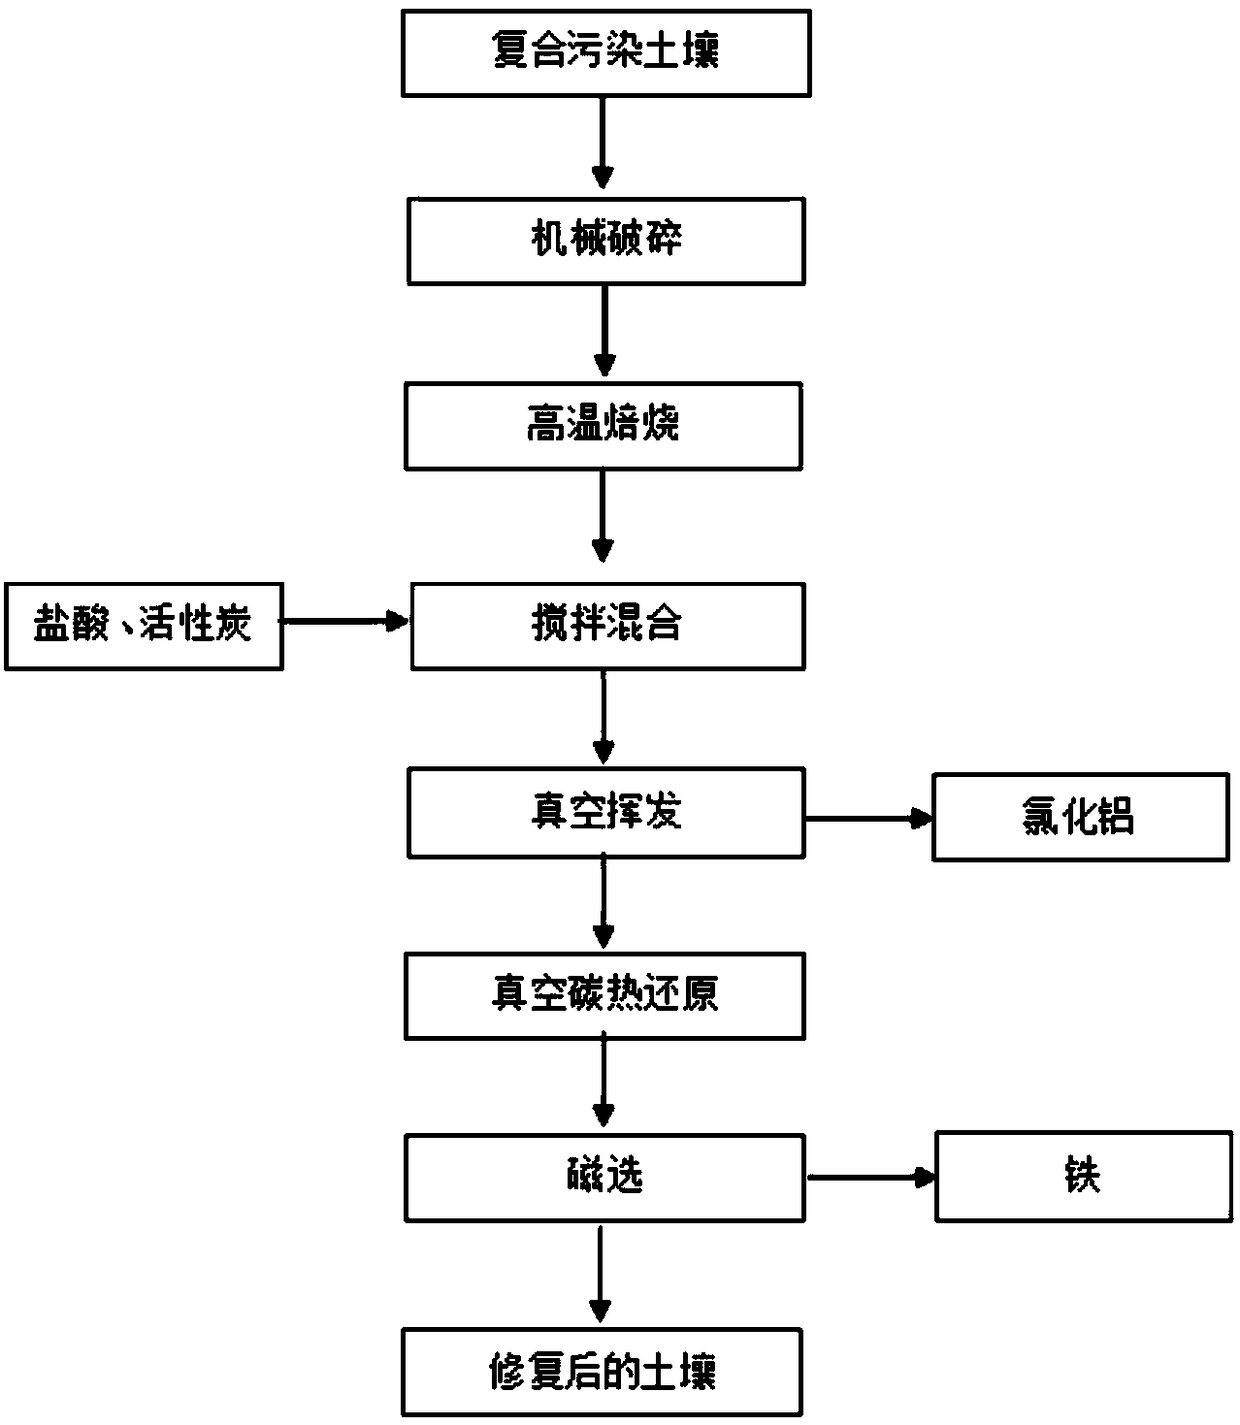 Treatment method of aluminum and iron composite polluted soil